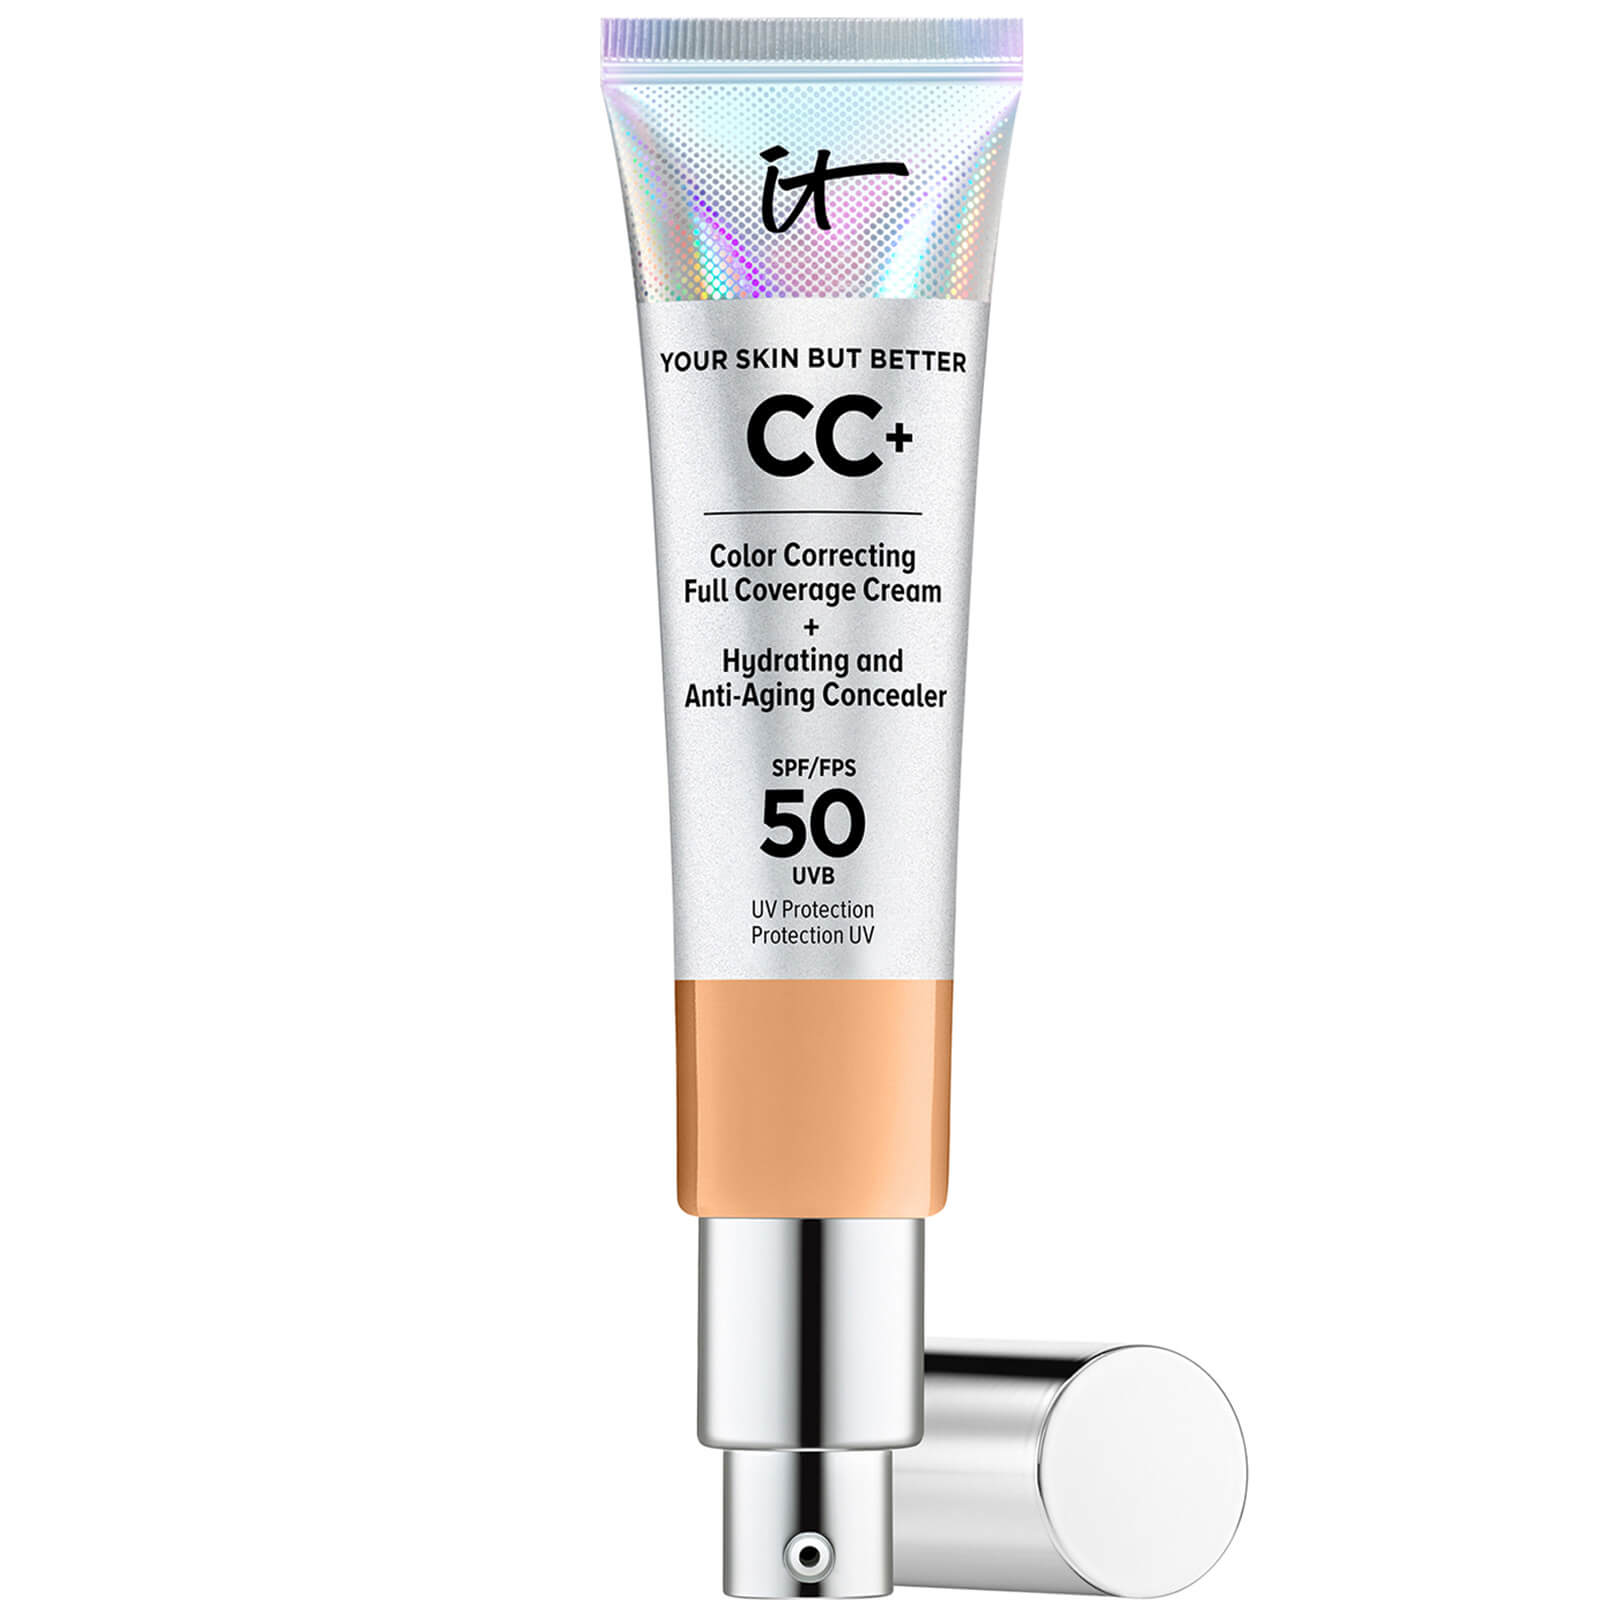 IT Cosmetics Your Skin But Better CC+ Cream with SPF50 32ml (Various Shades) - Neutral Tan